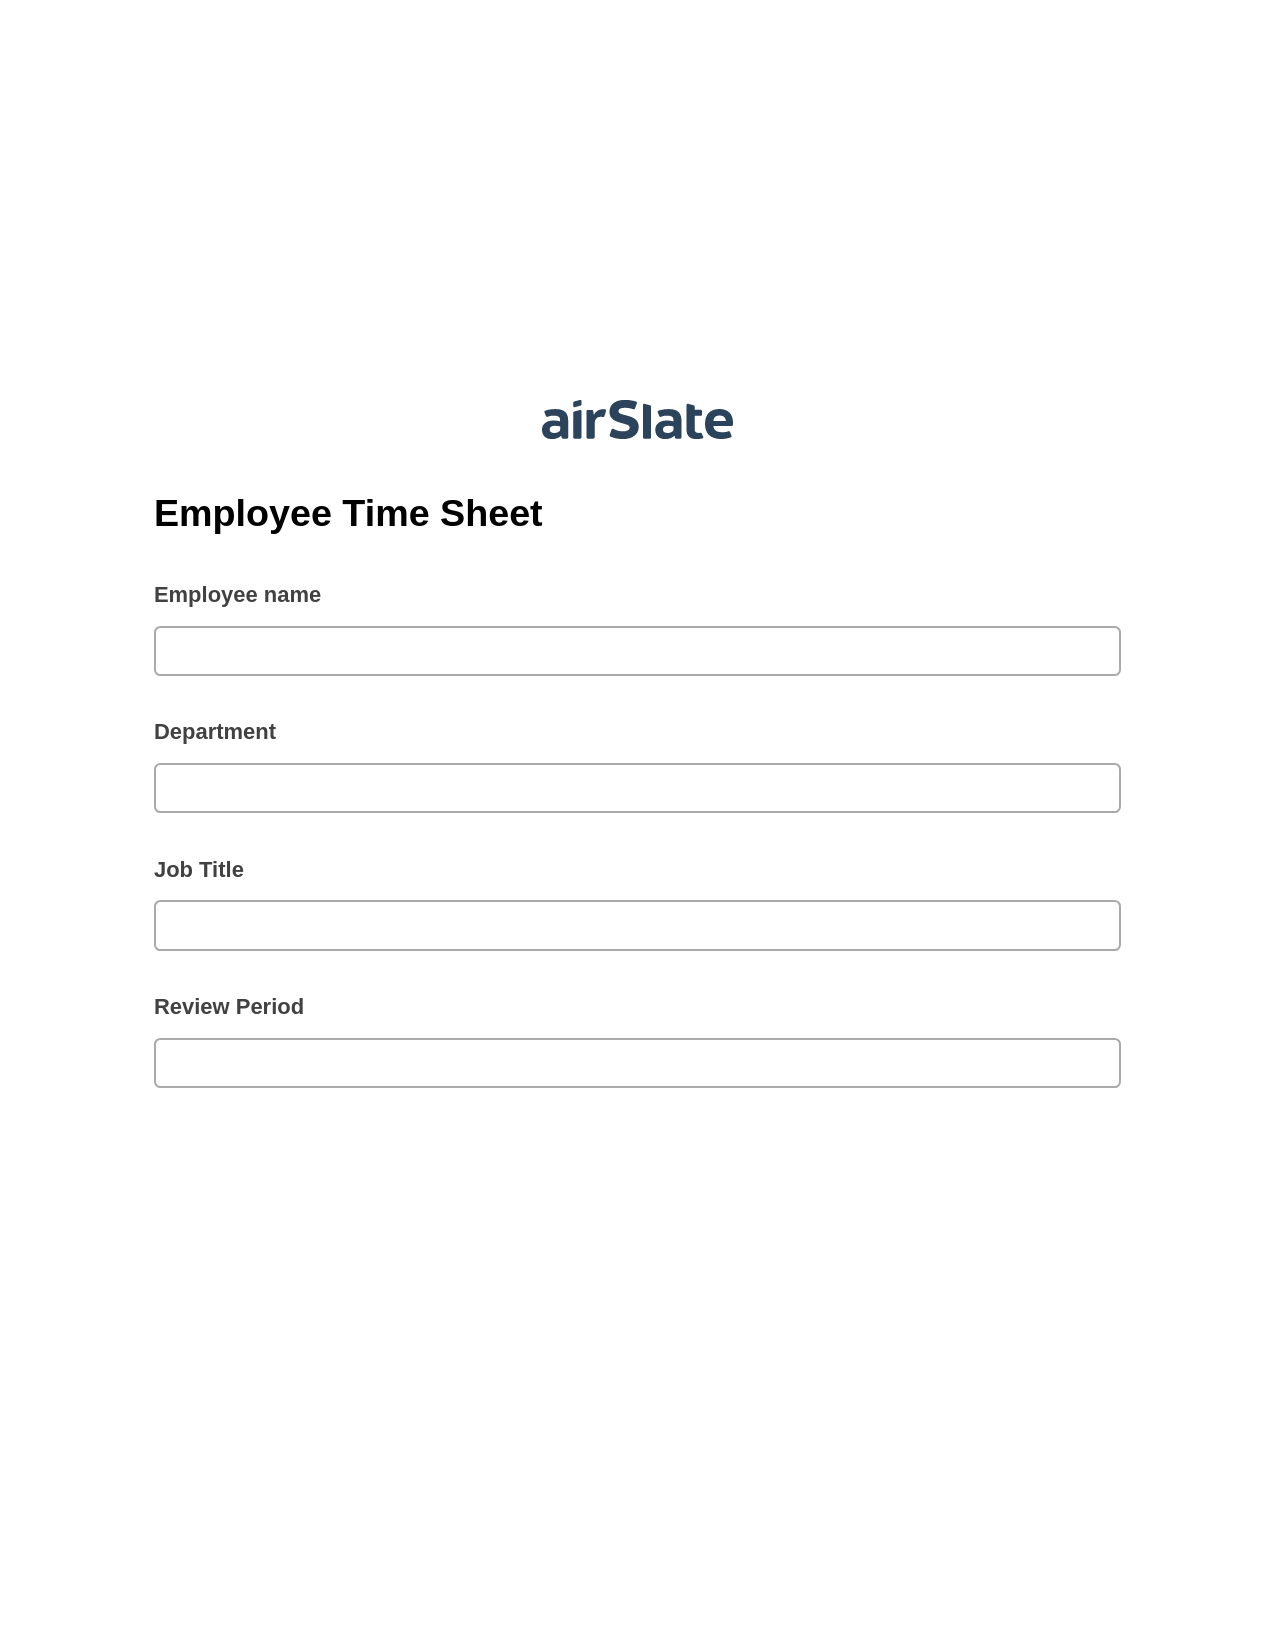 Multirole Employee Time Sheet Pre-fill from Smartsheet Bot, Create Salesforce Records Bot, Export to Excel 365 Bot